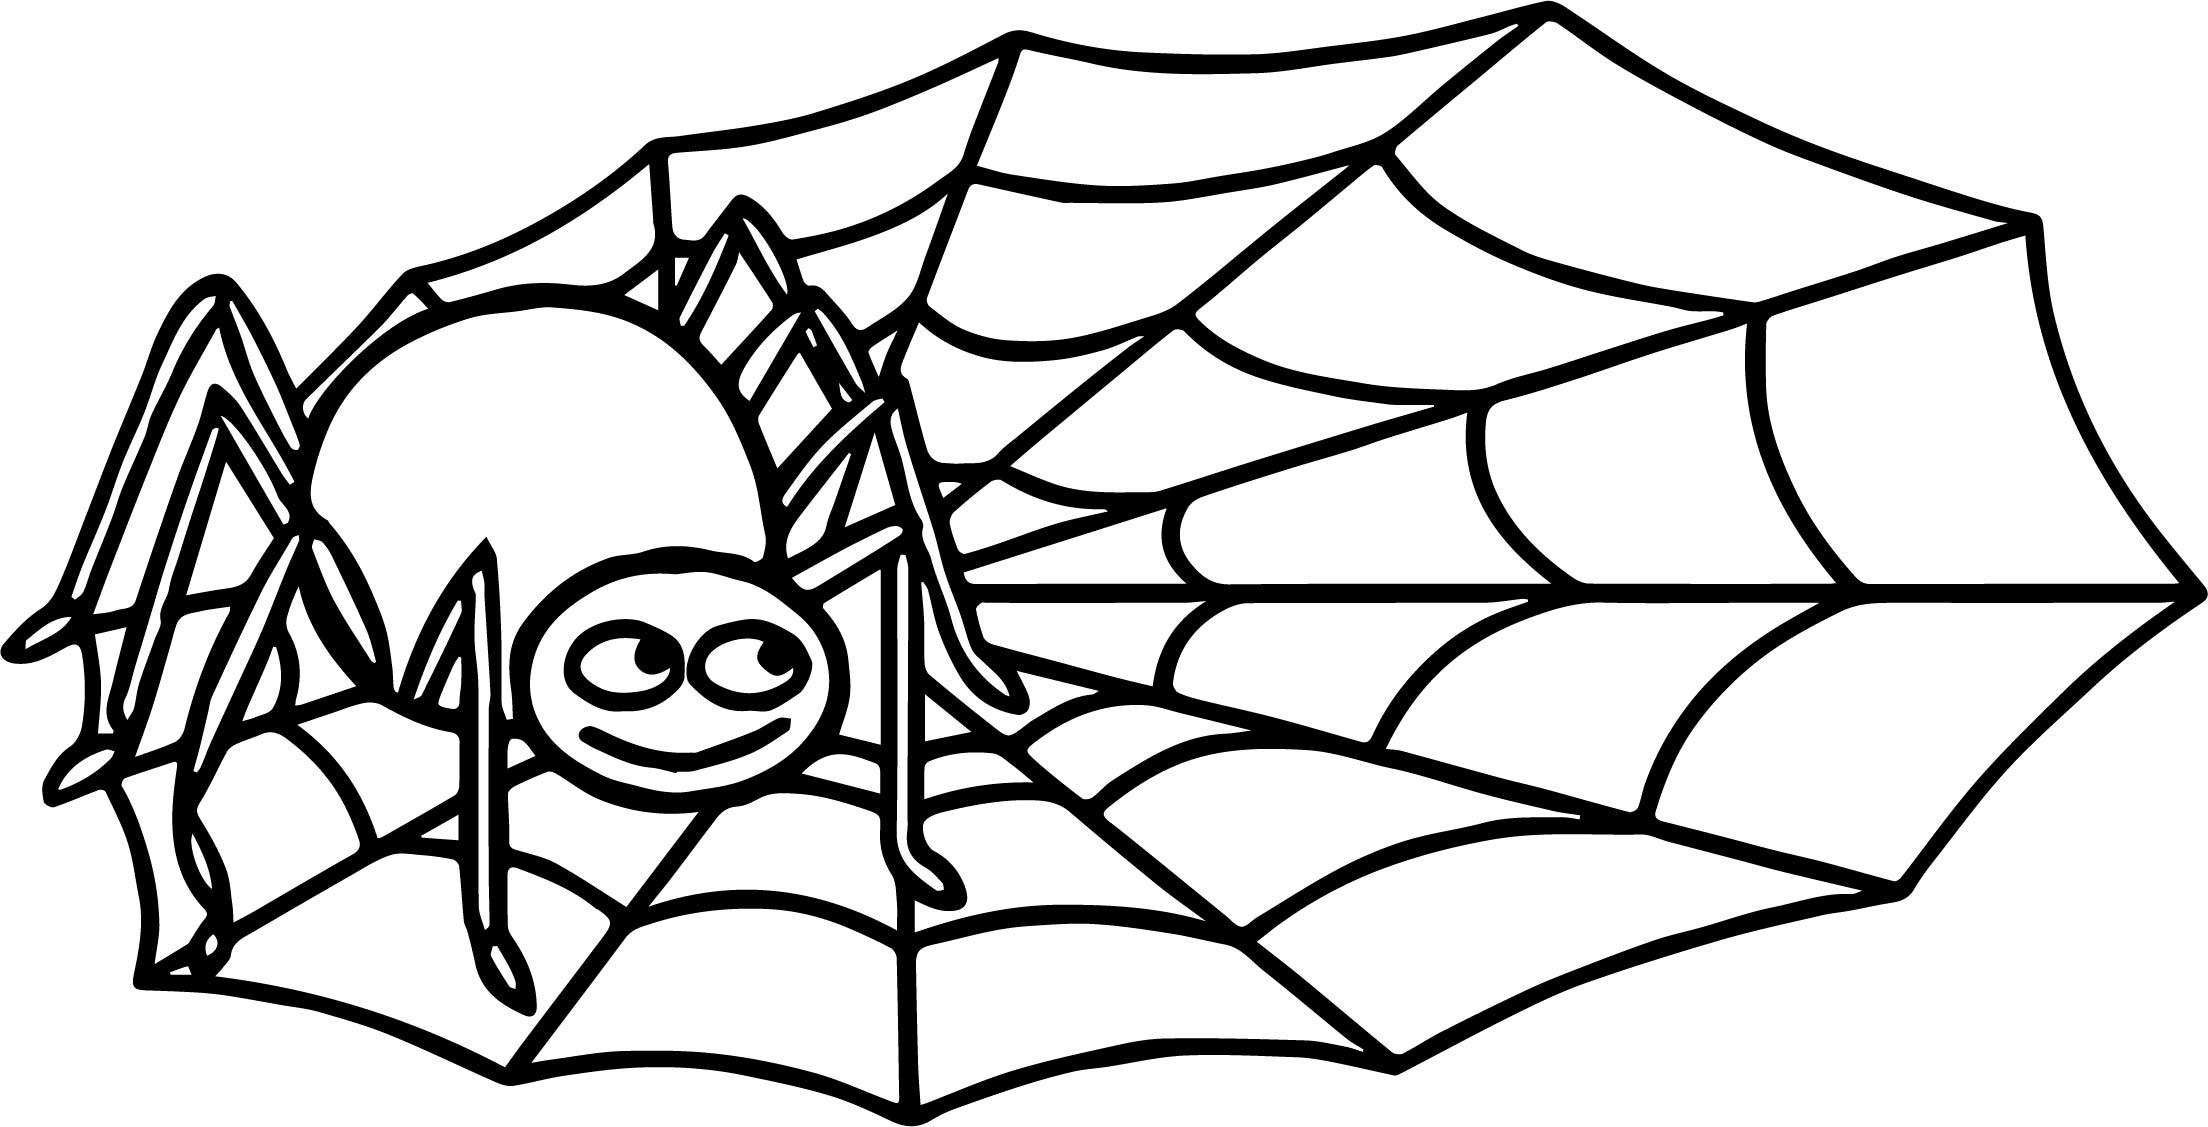 Cute Spider Coloring Pages at GetColorings.com | Free printable ...